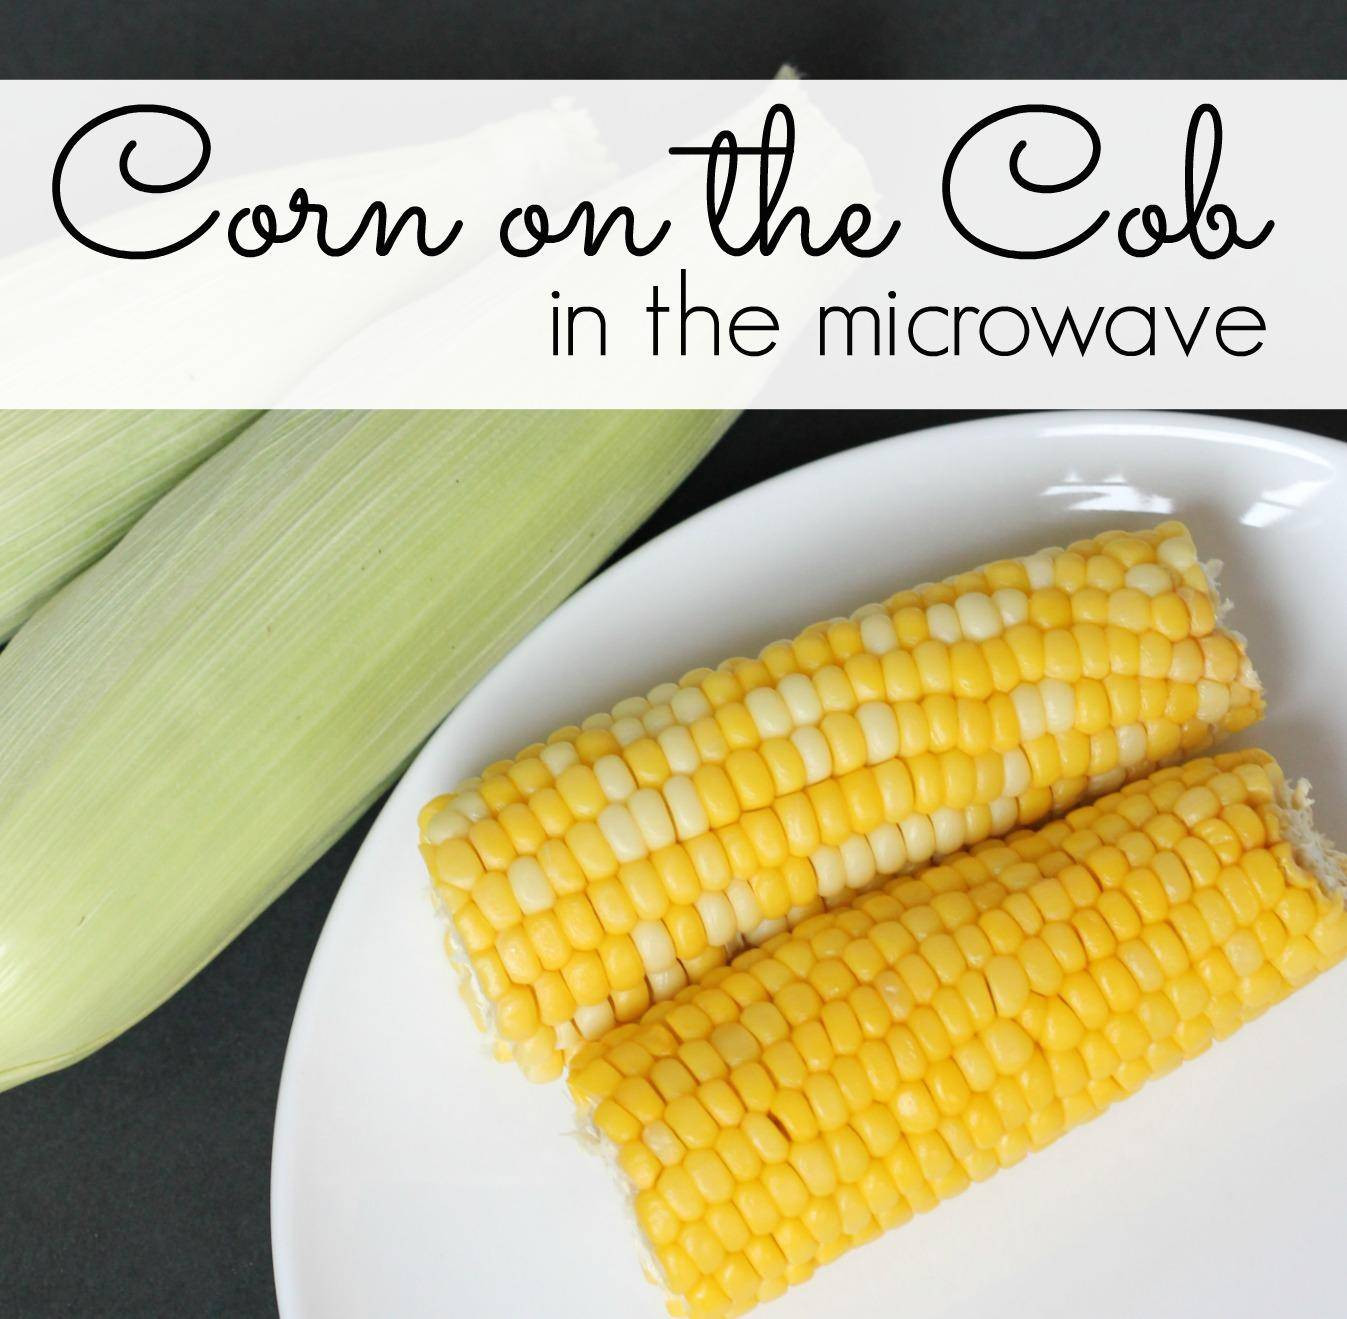 Corn On Cob In Microwave
 How to Cook Corn on the Cob in the Microwave